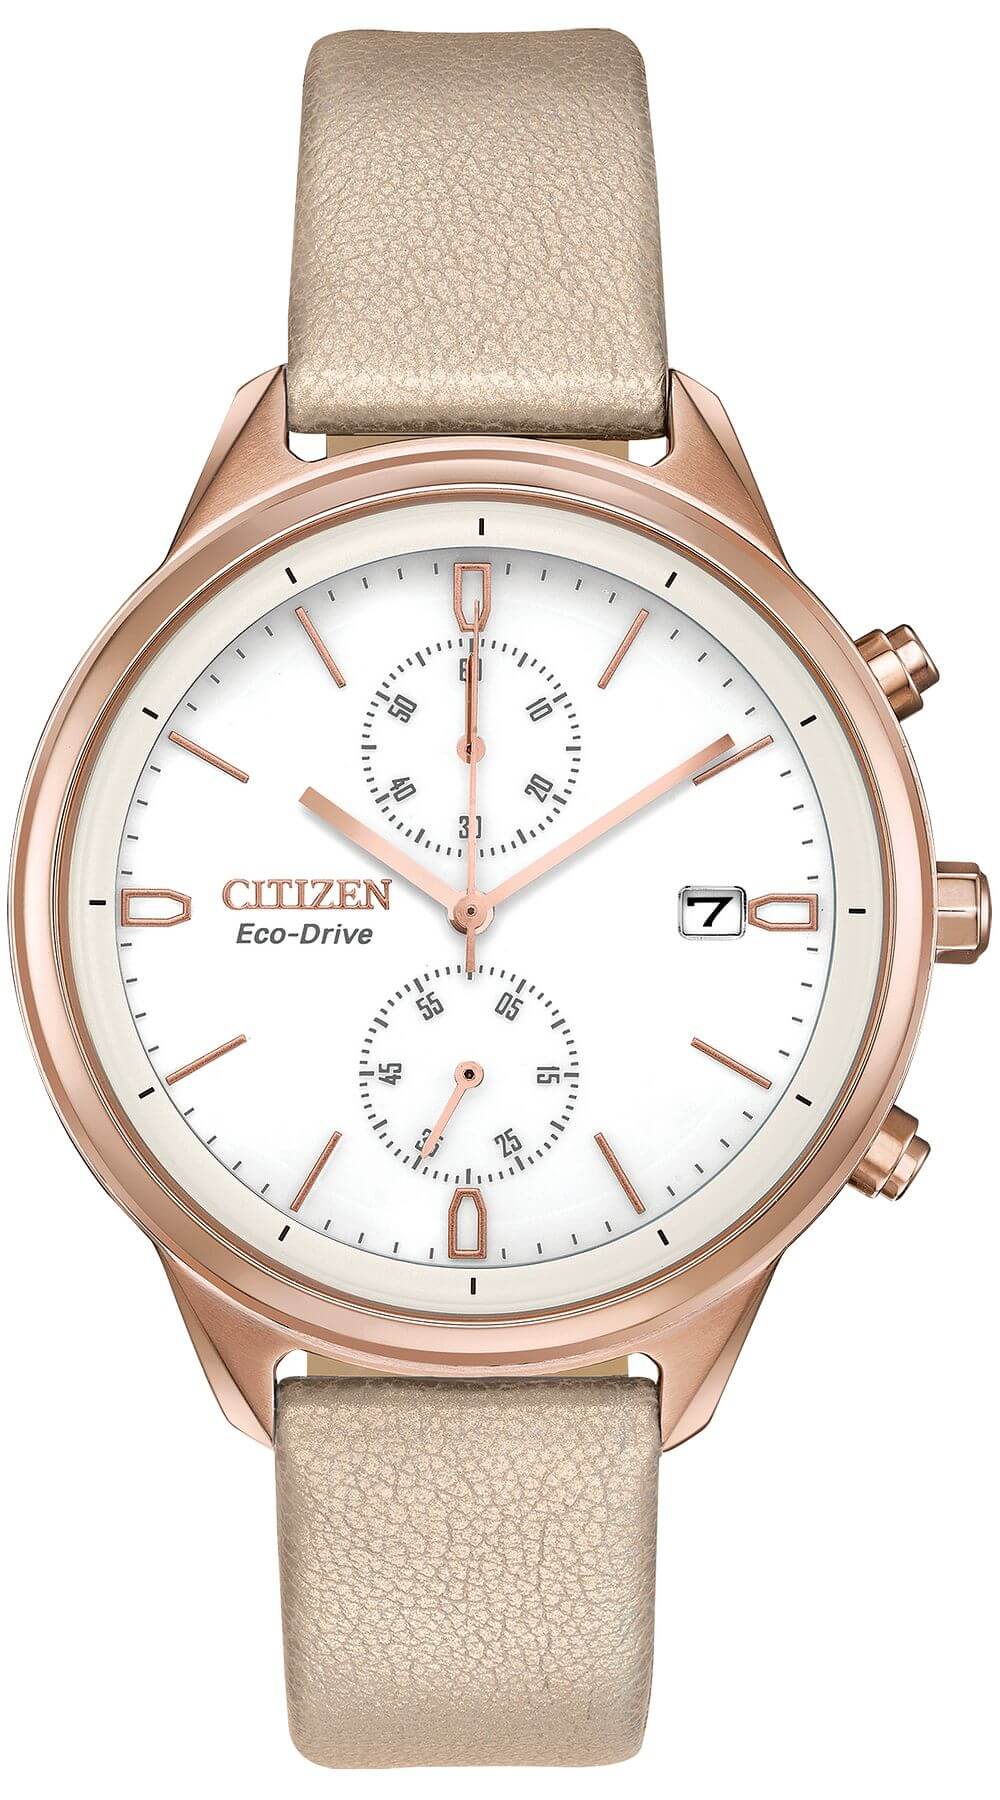 NEW Citizen Chandler FB2003-05A Ladies Chronograph Watch MSRP $325